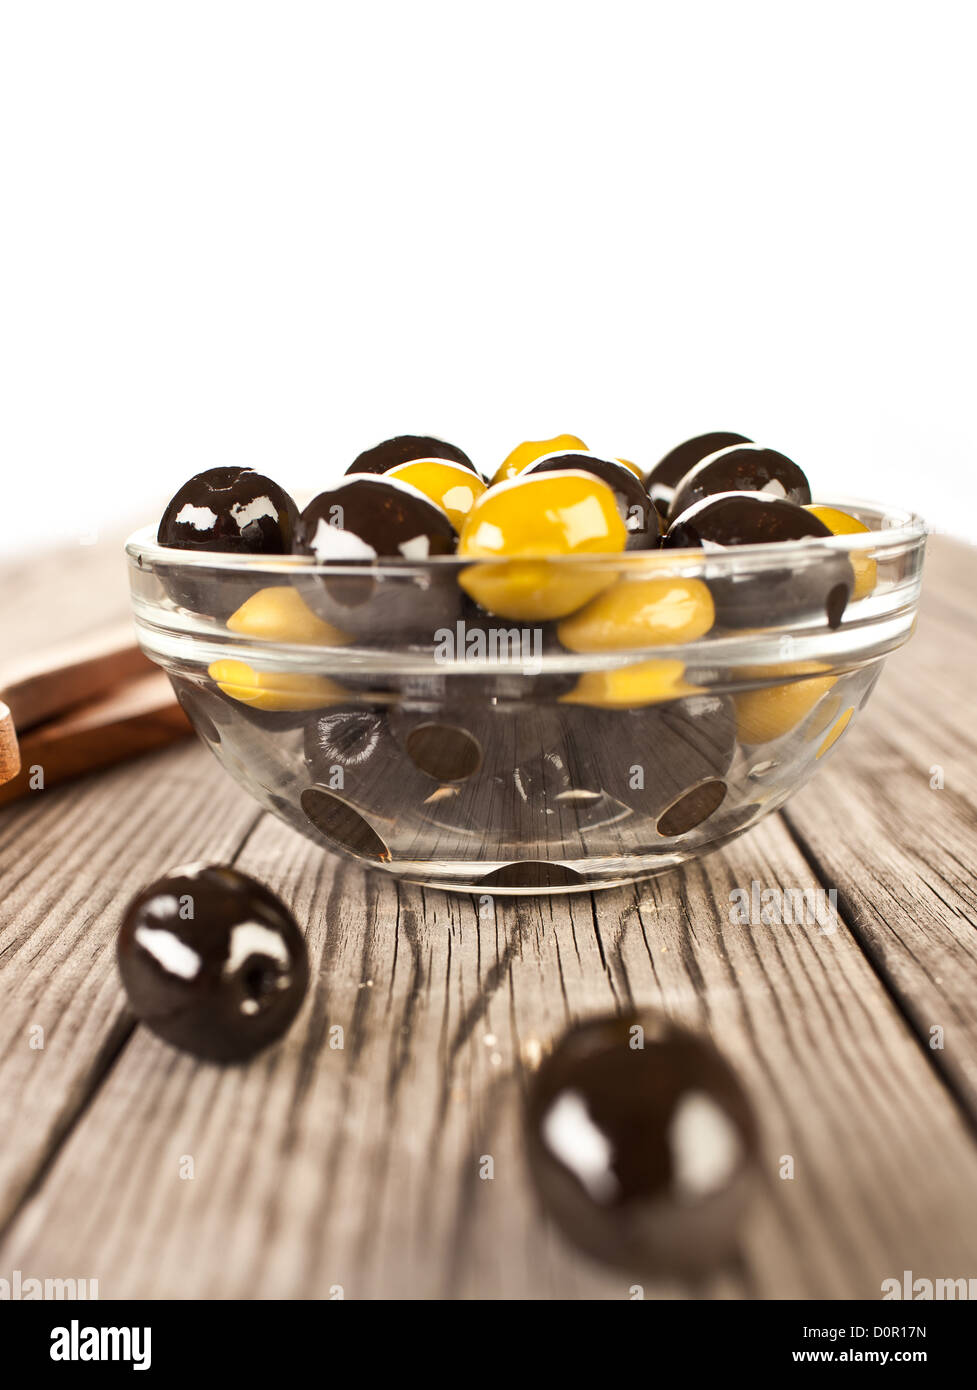 Olives on a wooden table Stock Photo